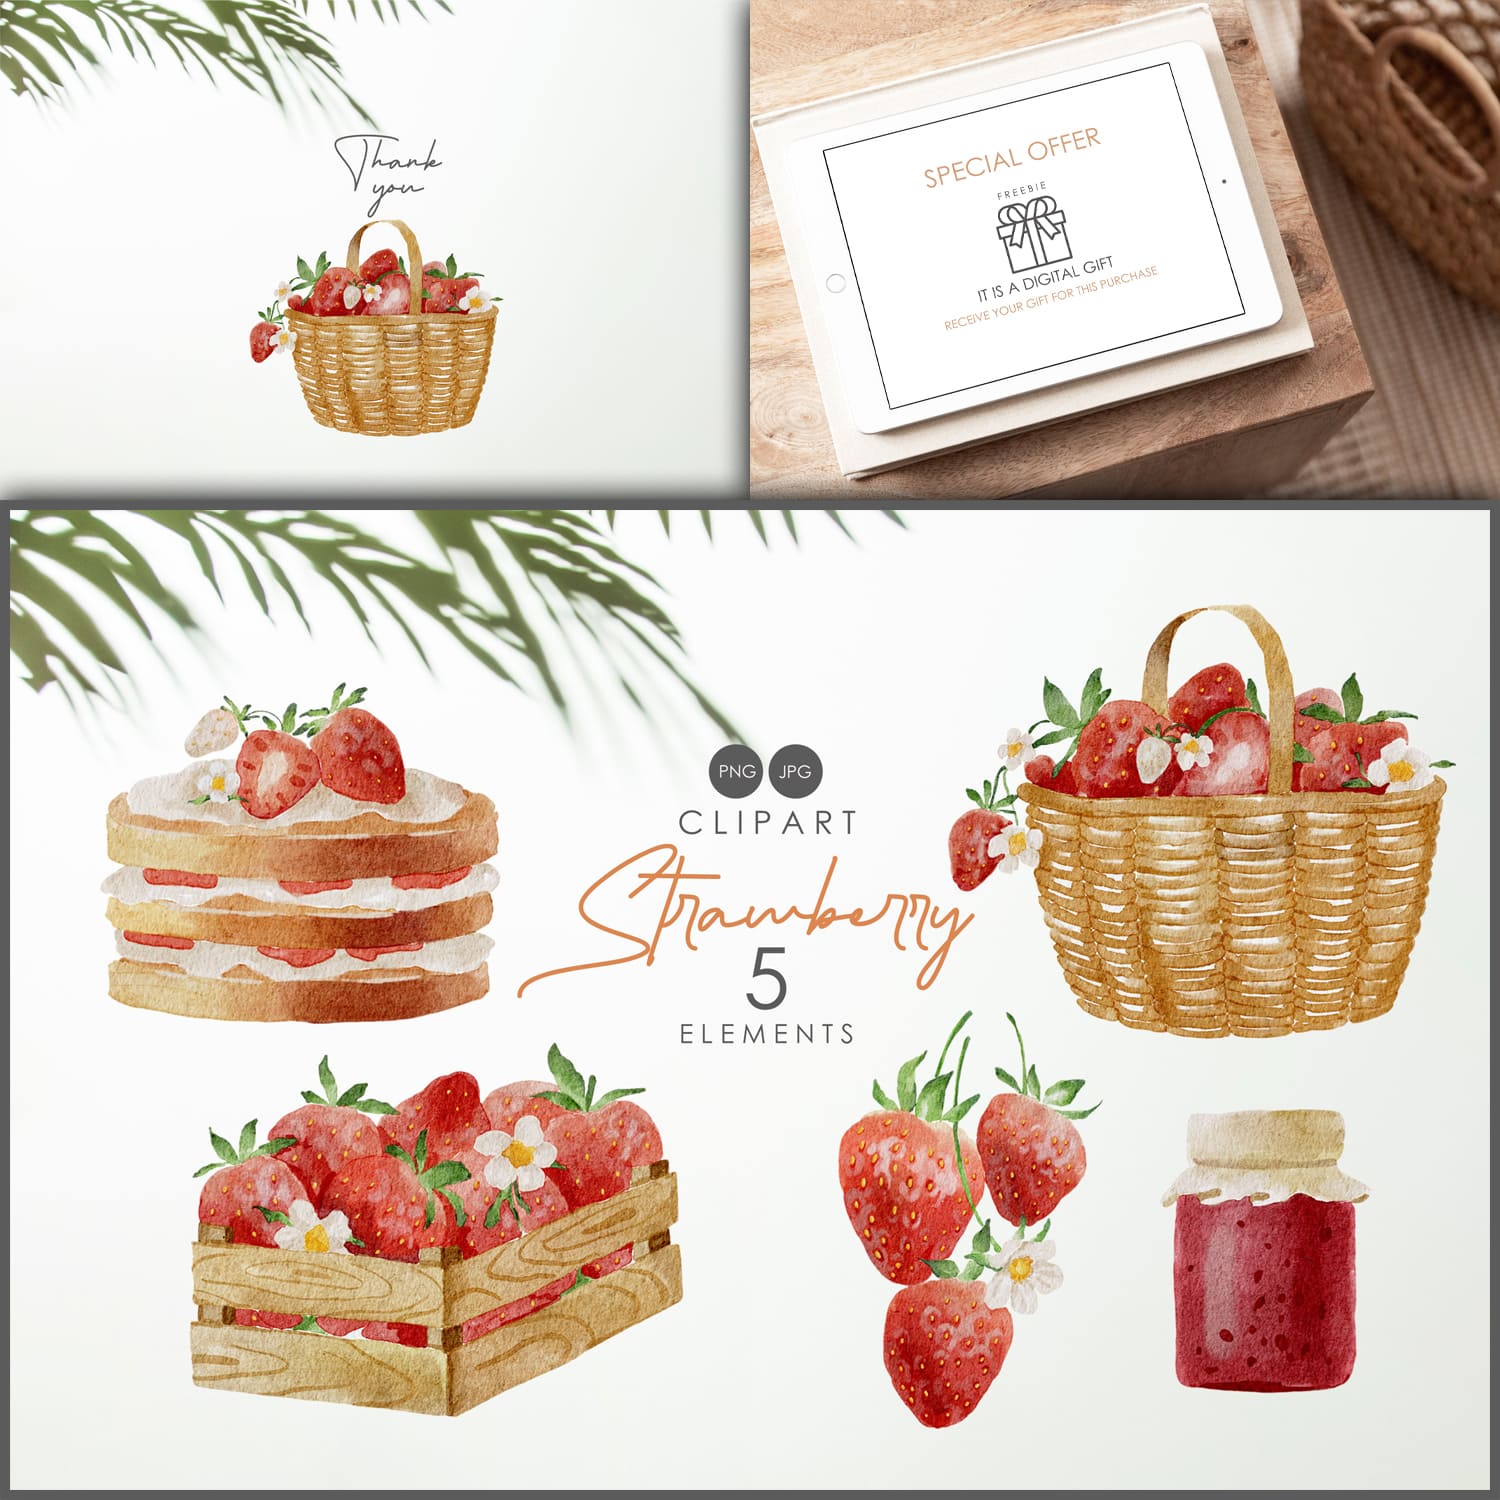 Fresh strawberries and strawberry products on a white background.